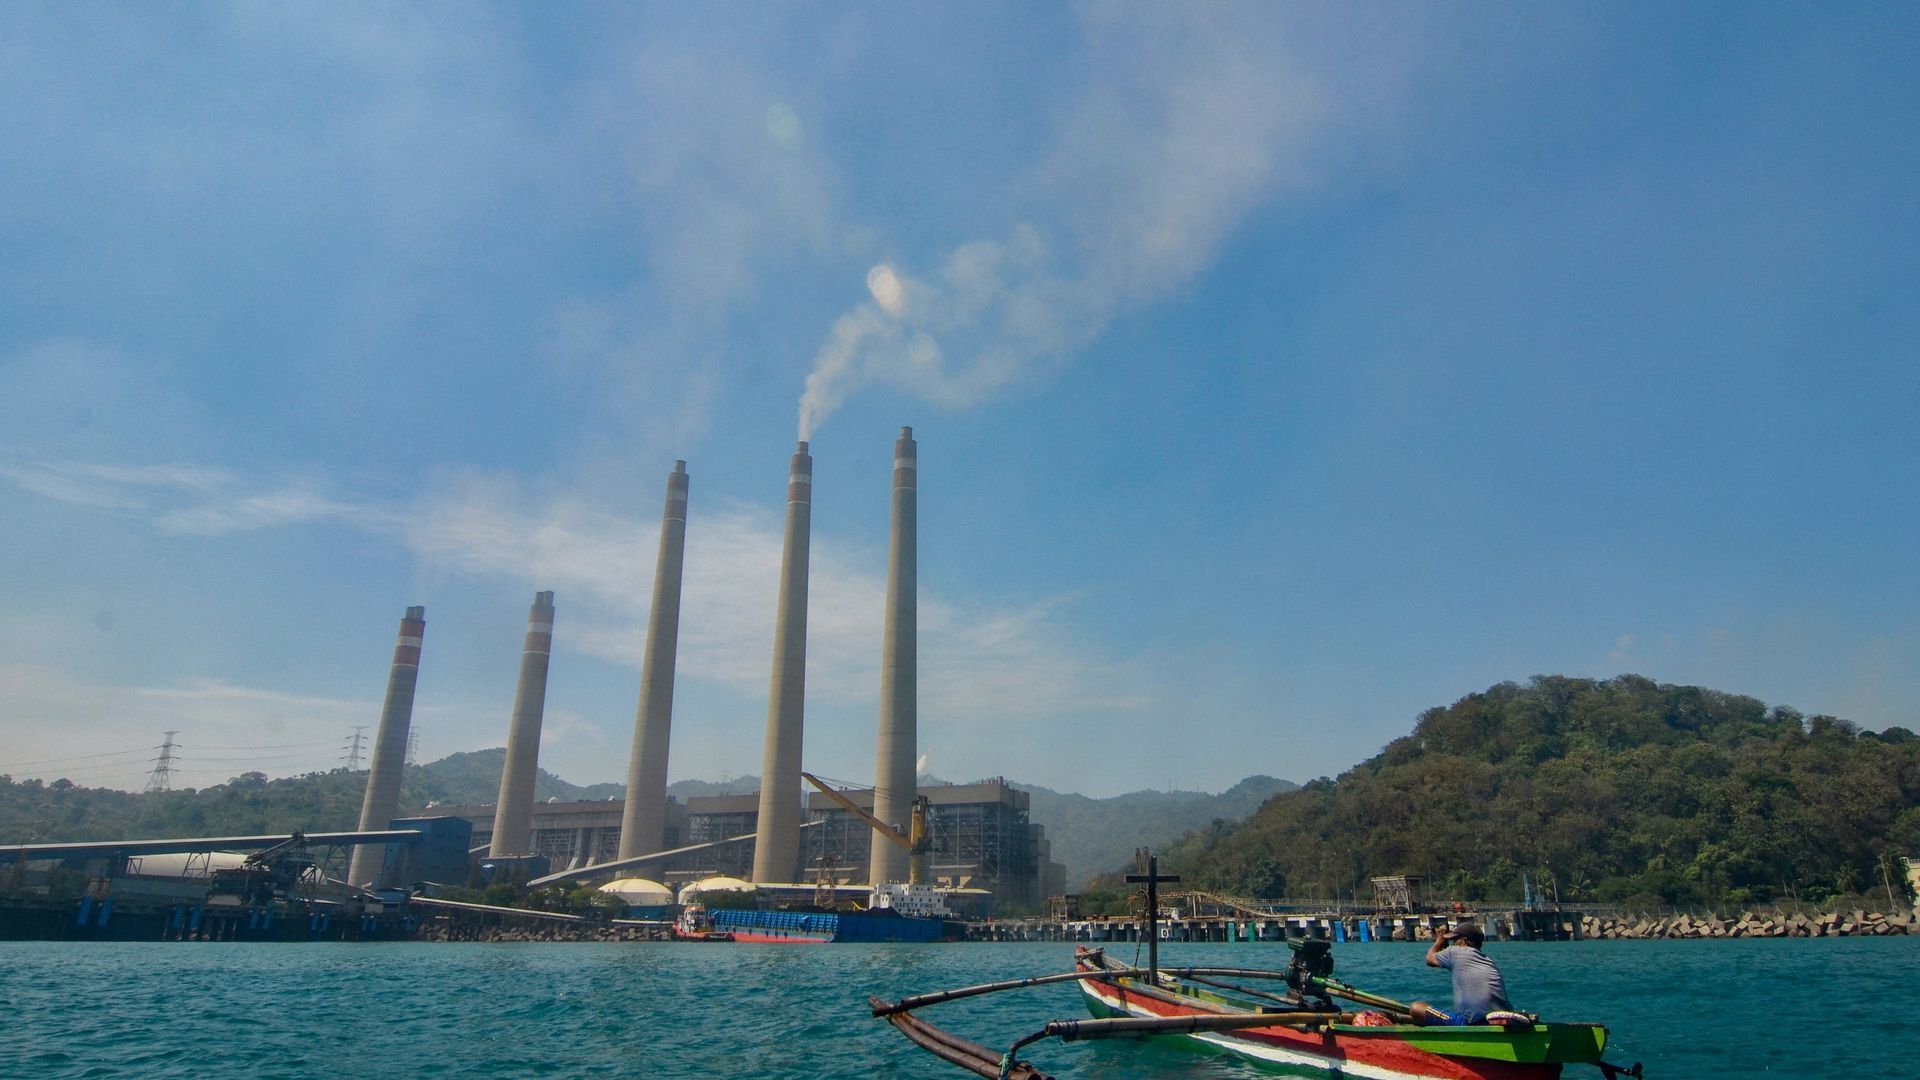 This photo taken on September 22, 2021 shows fishermen on their boat as smoke rises from chimneys at the Suralaya coal power plant in Cilegon, Indonesia. Photo by RONALD SIAGIAN/AFP via Getty Images